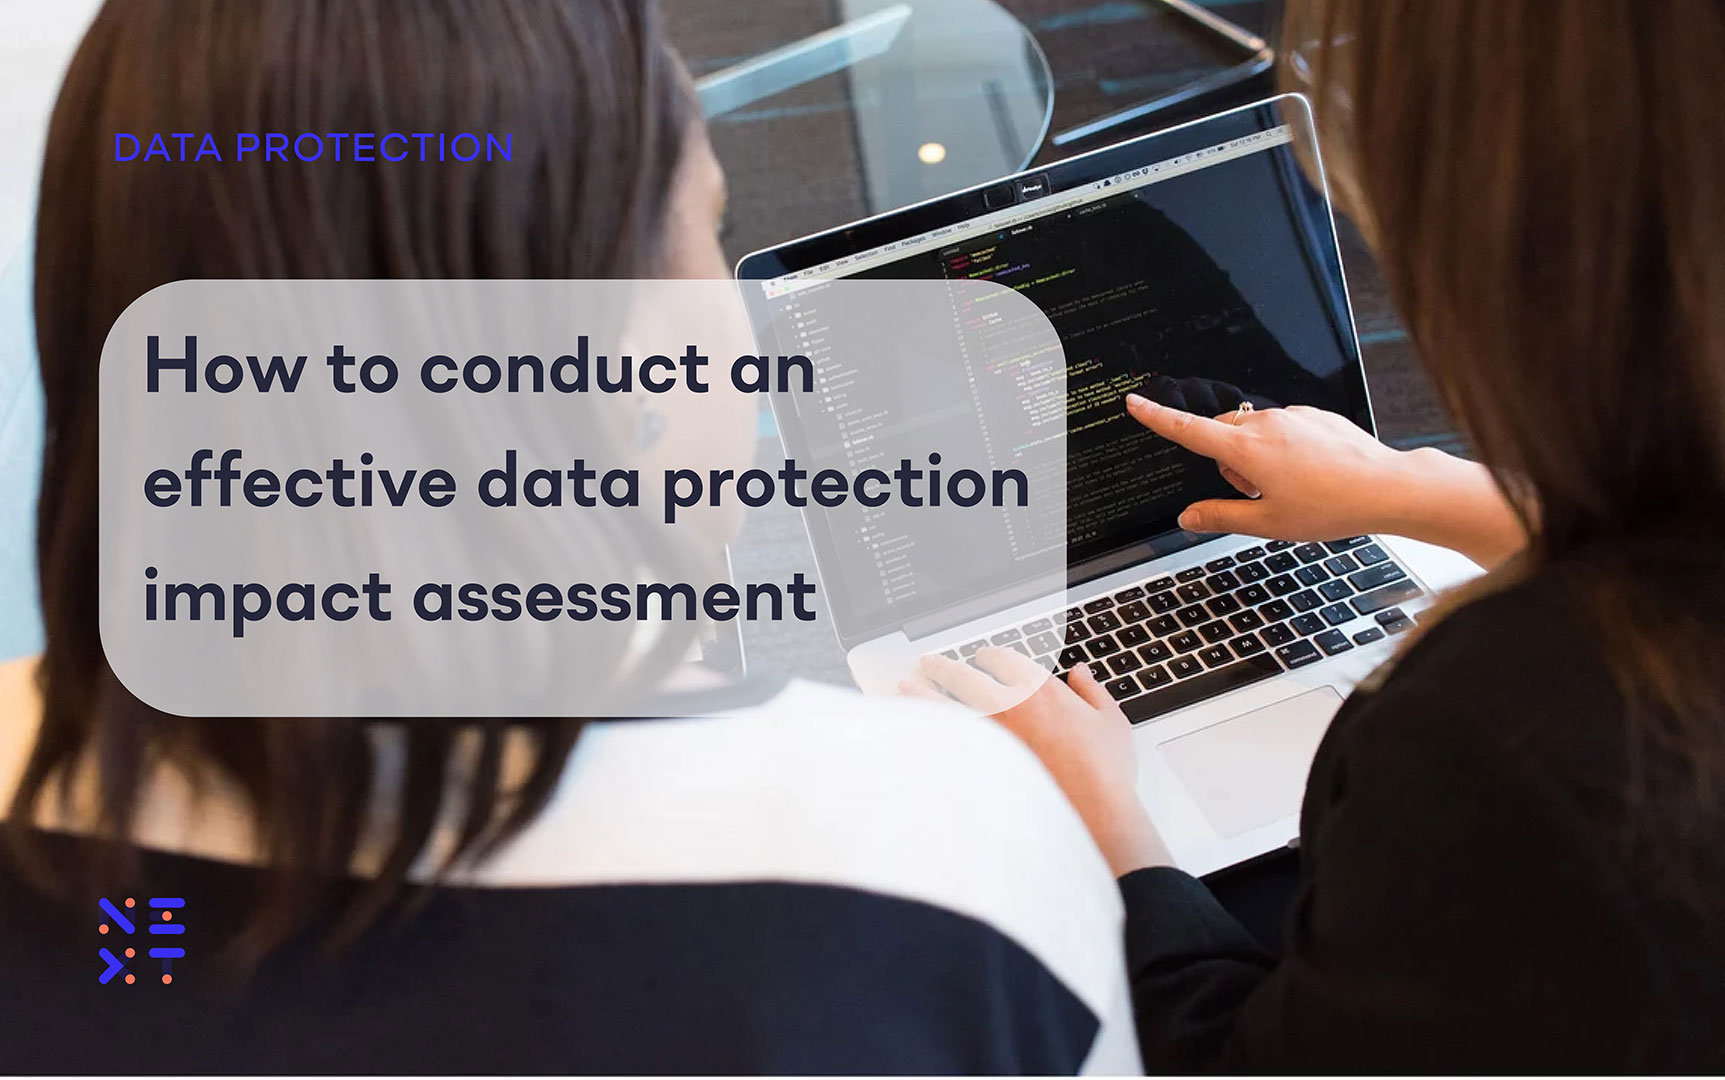 GDPR: How to create a data protection impact assessment - Termageddon